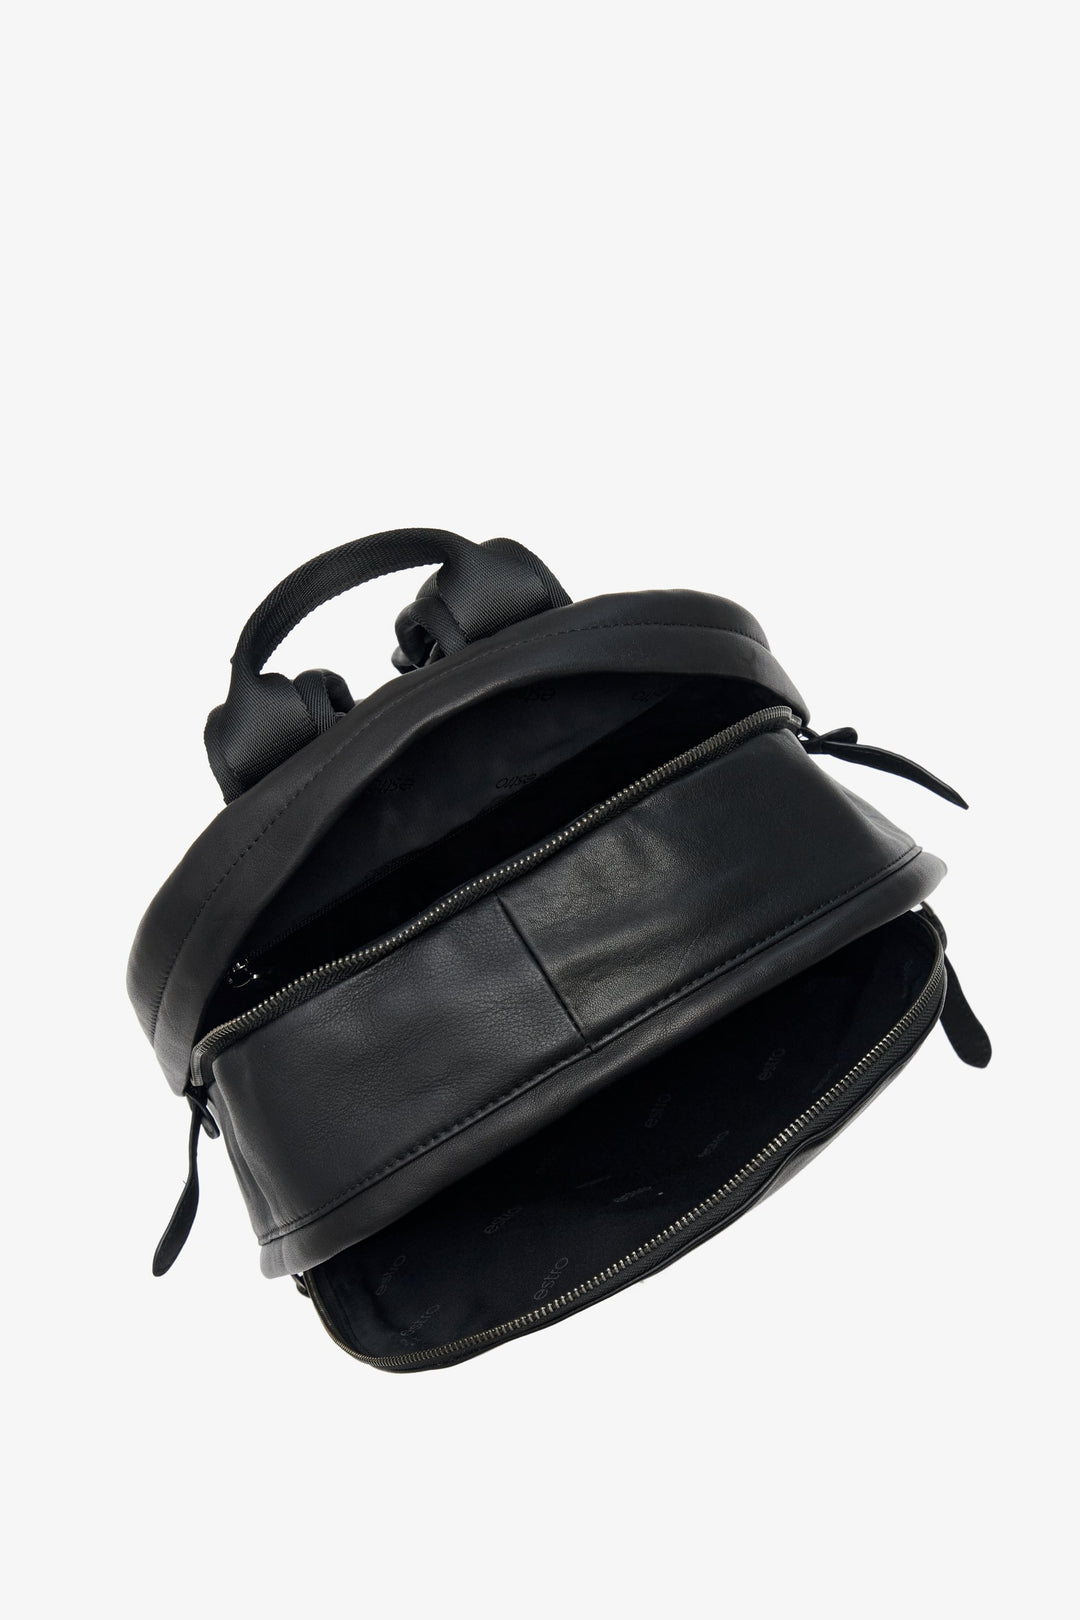 Men's black large backpack by Estro made of genuine leather - close-up on the interior design.